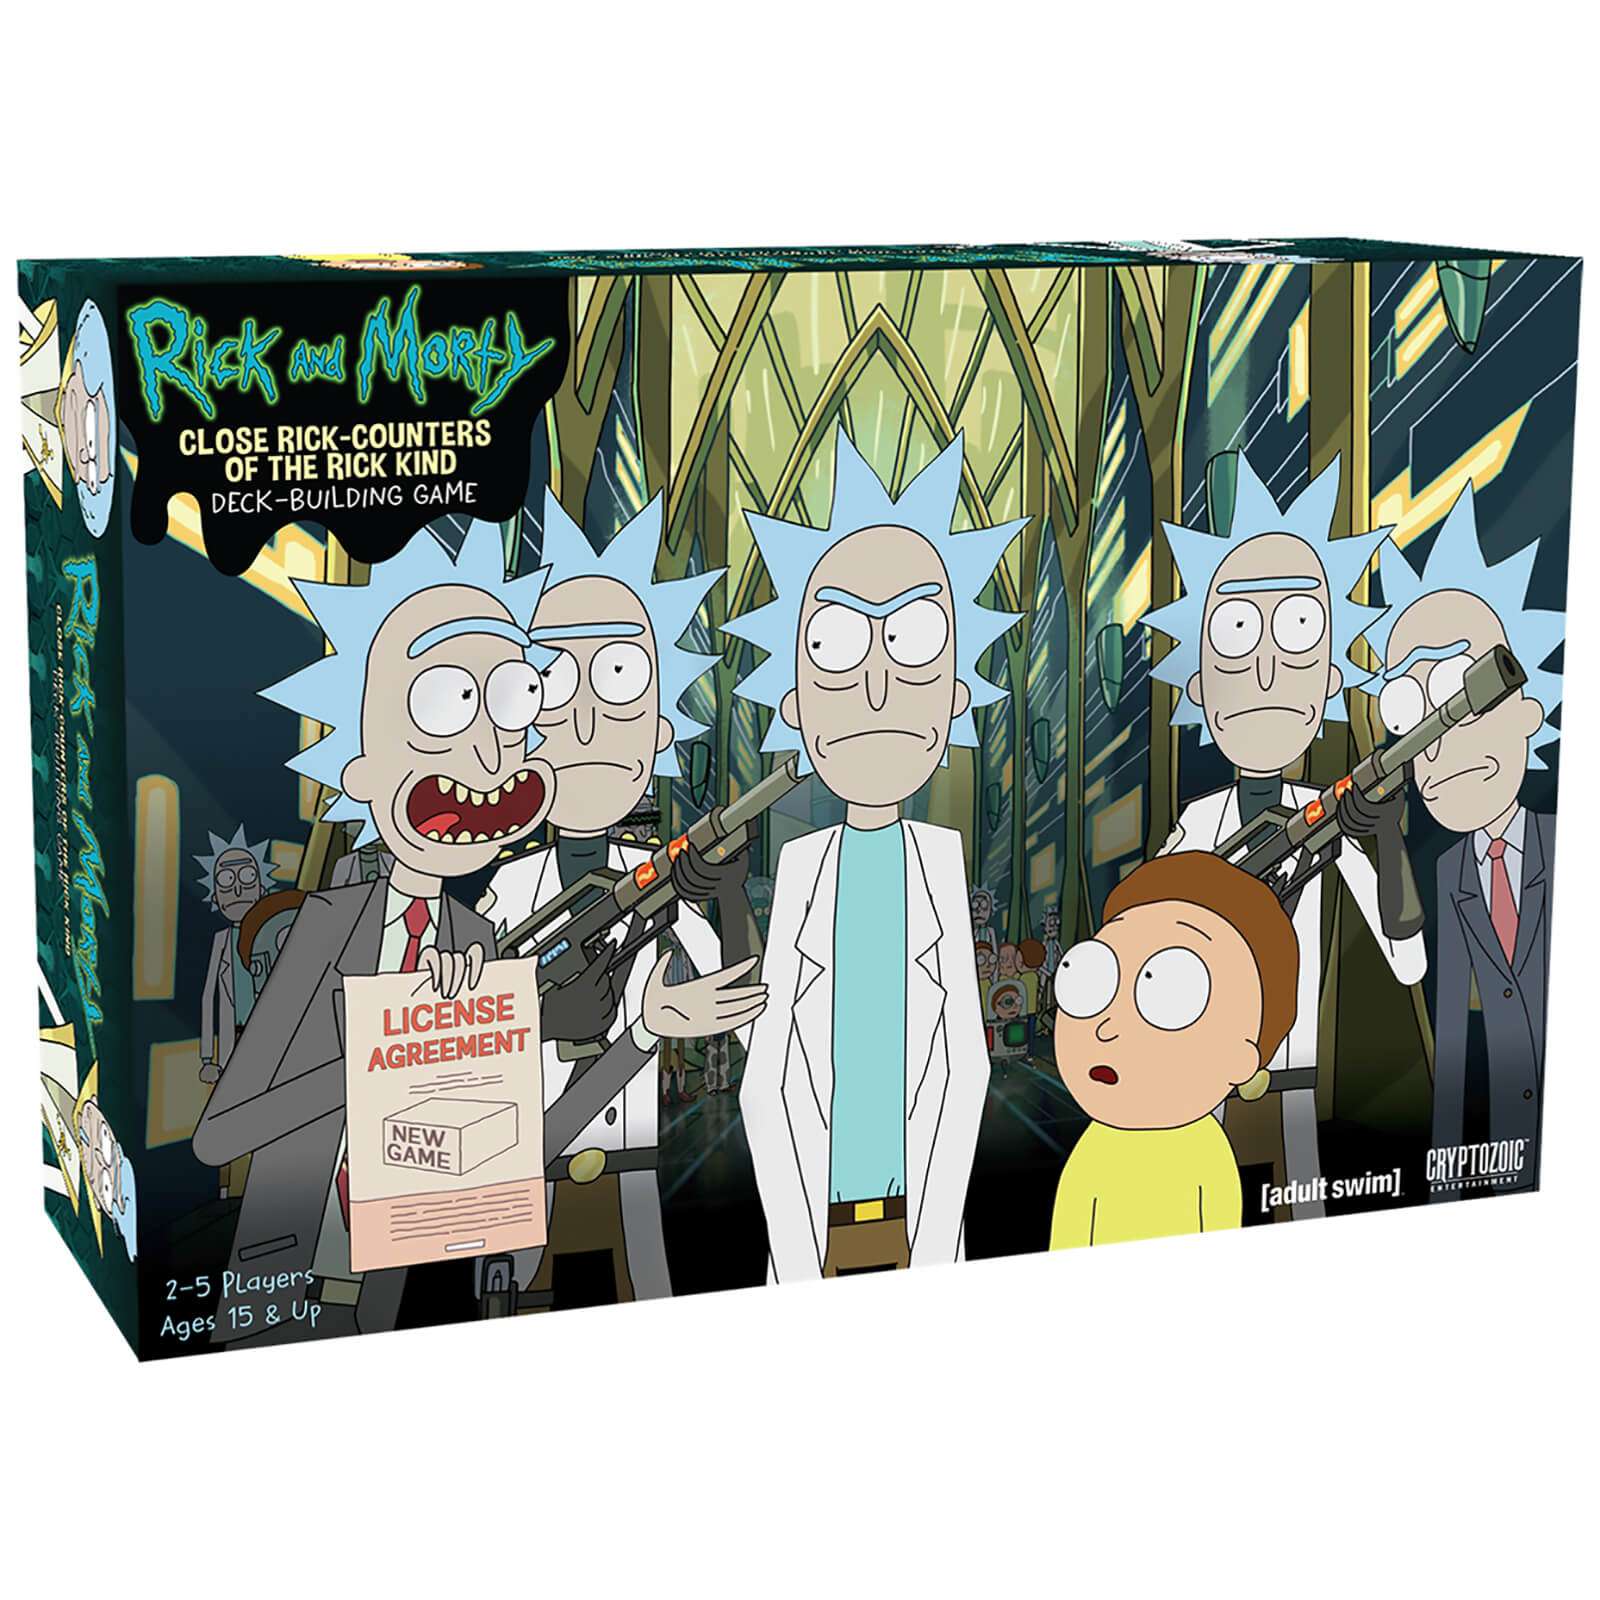 Rick and Morty - Close Rick Counters of the Rick Kind - Deck Building Game (MDIEOTHEO02574)